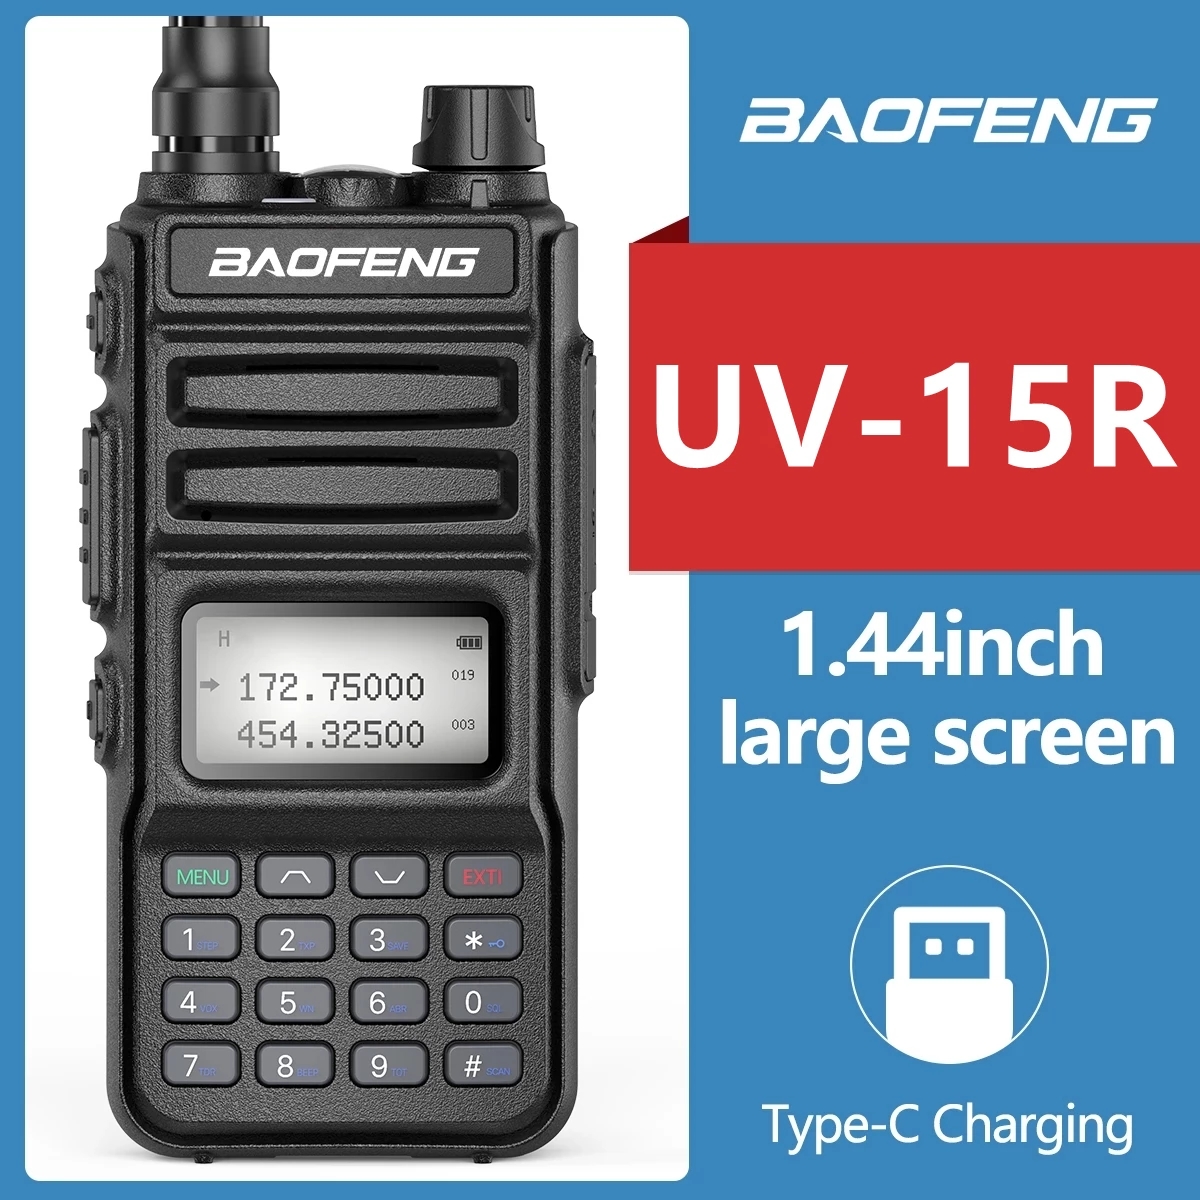 Find 2022 Baofeng UV 15R Walkie Talkie 10W High Power 999 Channels Dual Band UHF VHF Radios Transmitter USB Charger Two Way Radio for Sale on Gipsybee.com with cryptocurrencies